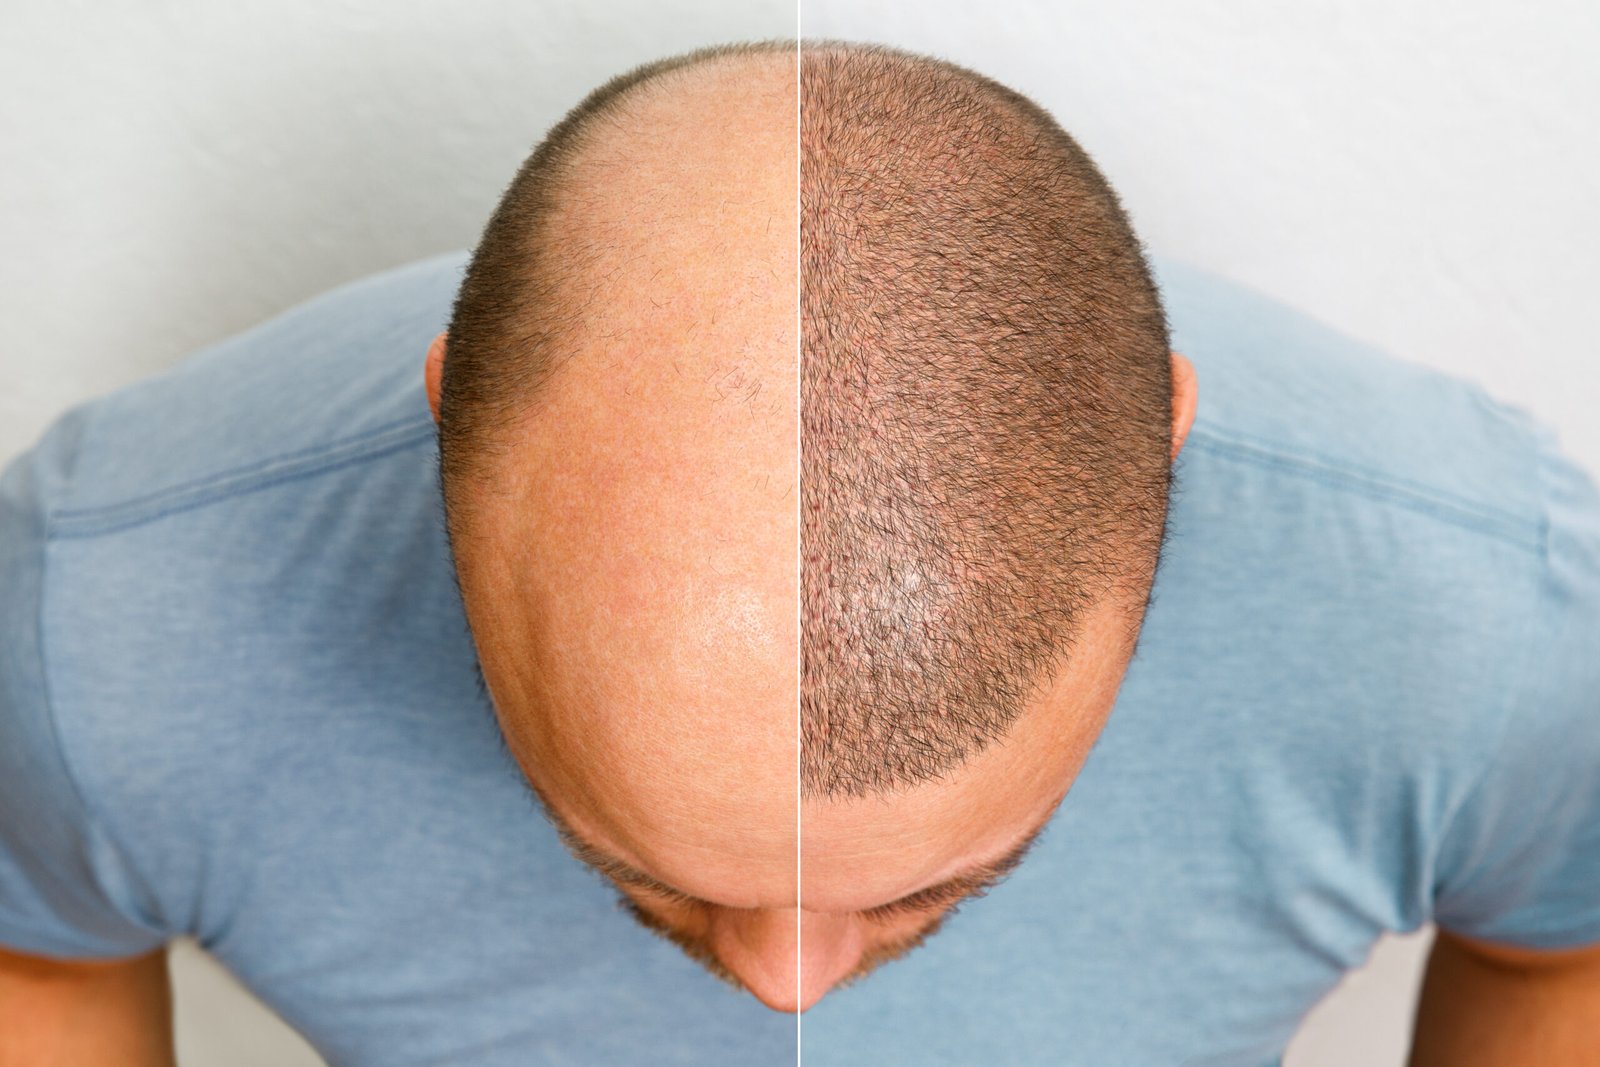 The head of a balding man before and after hair transplant surgery. A man losing his hair has become shaggy. An advertising poster for a hair transplant clinic. Treatment of baldness